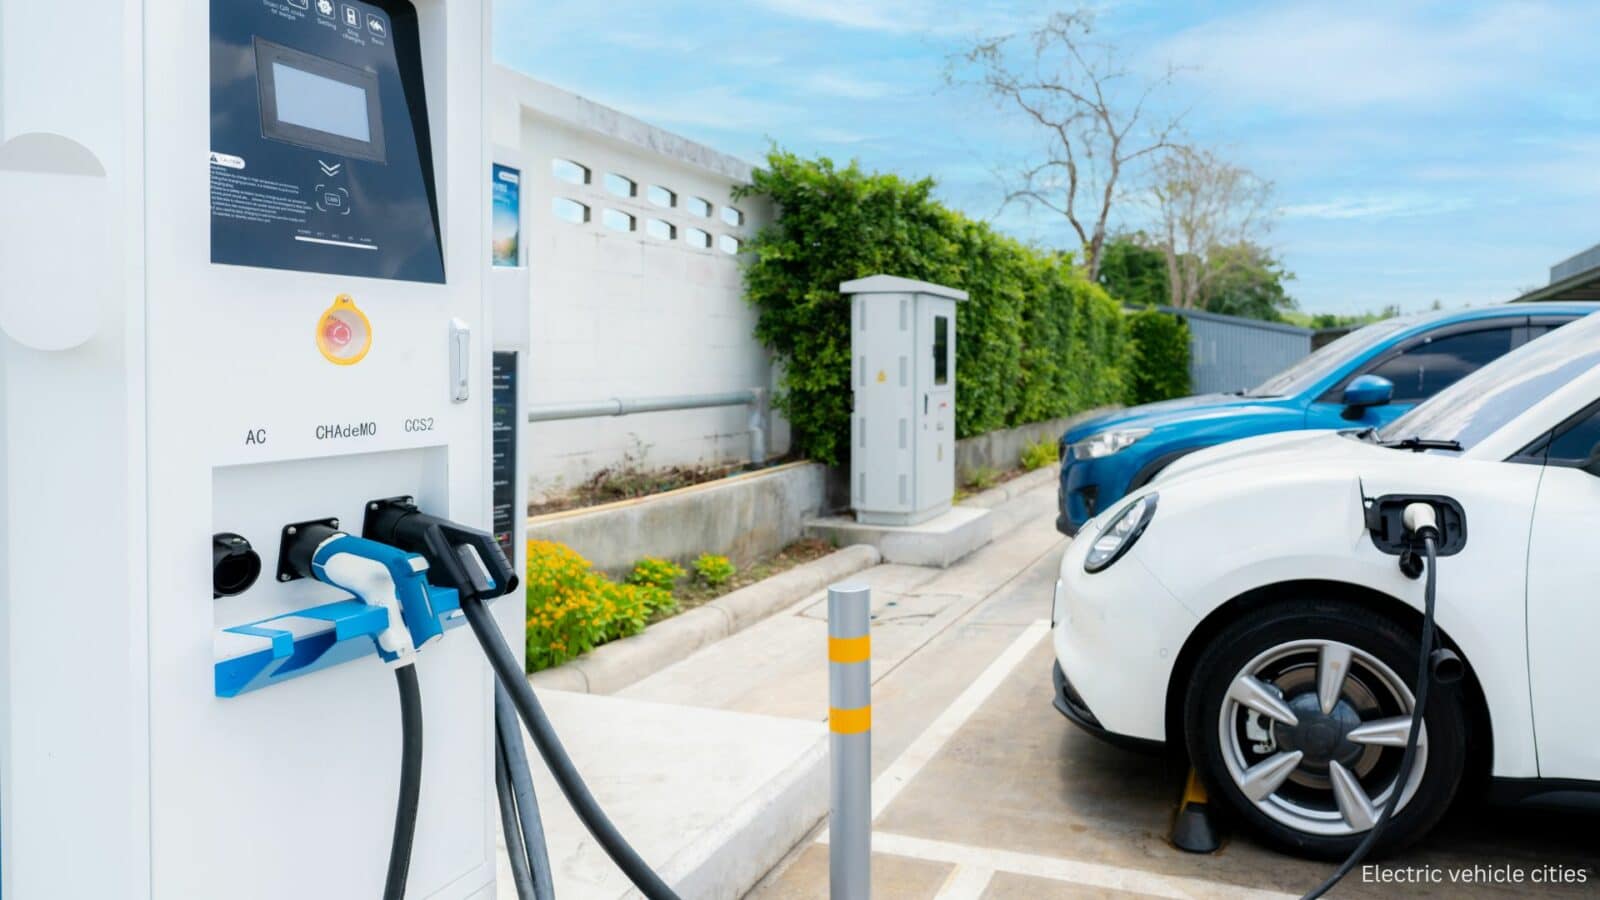 Electric vehicle cities